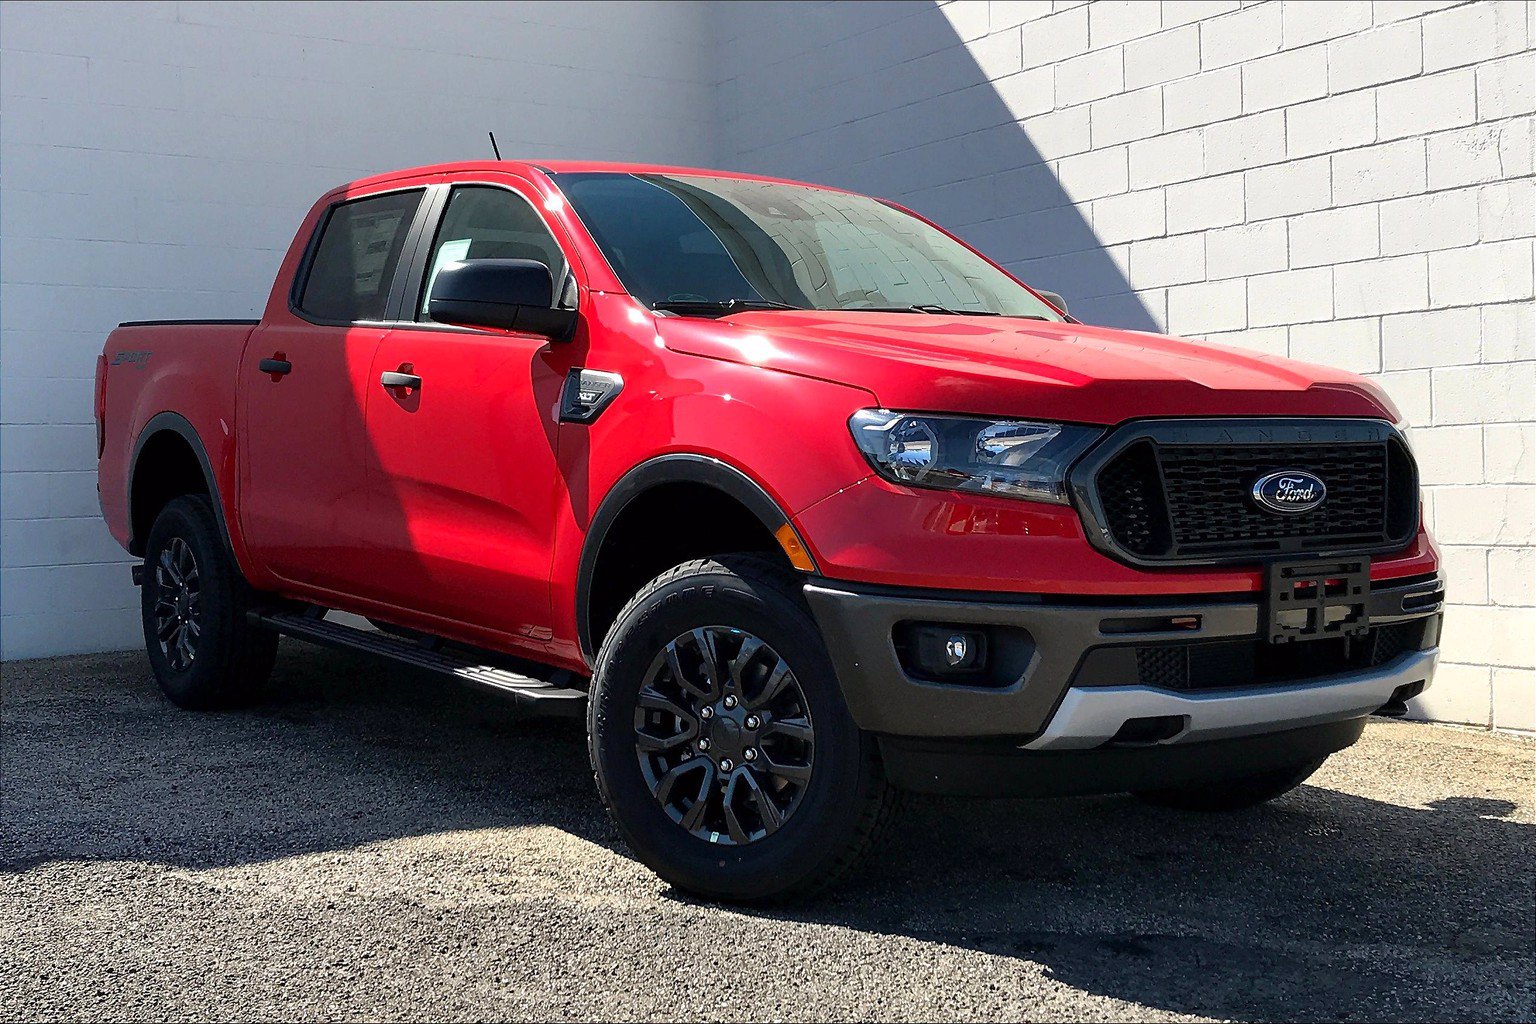 New 2020 Ford Ranger XLT 4D Crew Cab in Morton #A44481 | Mike Murphy Ford